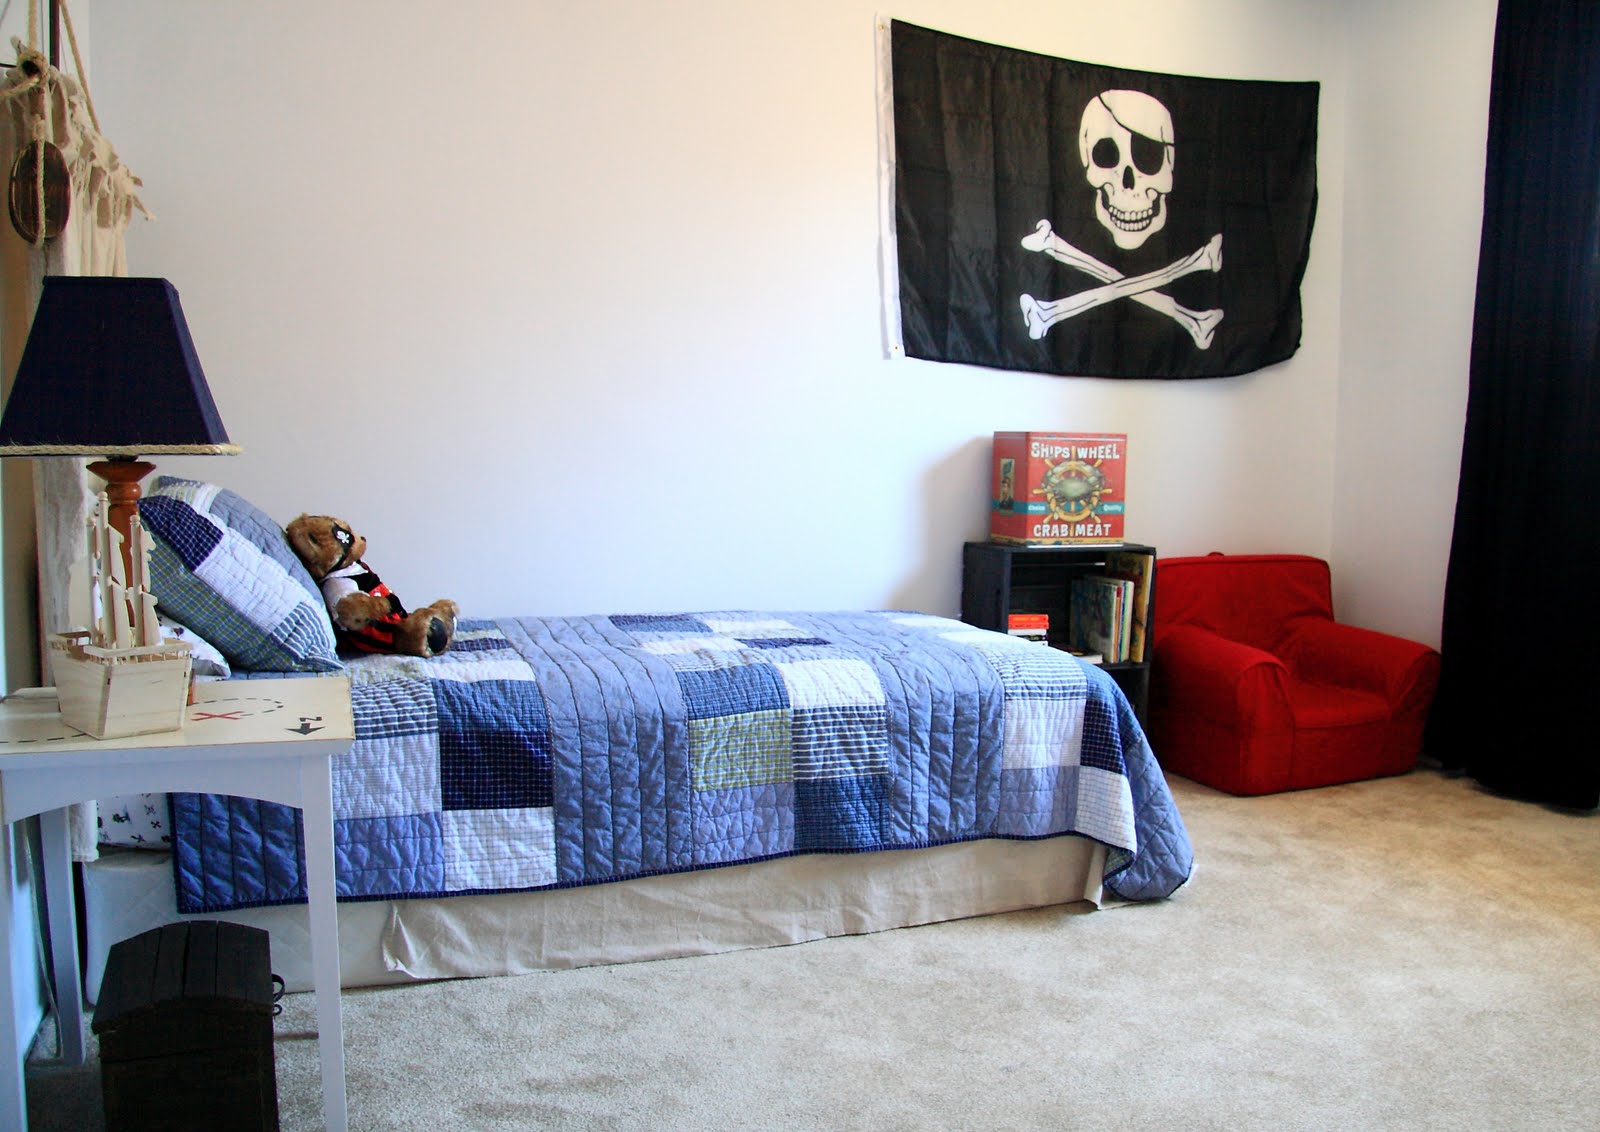 Bedroom For Pirates Fascinating Bedroom For Boys Applying Pirates Design Of Cool Kids Rooms With Single Bed In Blue Cover Bed Furnished With Nightstand And Red Chair Kids Room Desire Behind The Creation Of Cool Kids Rooms